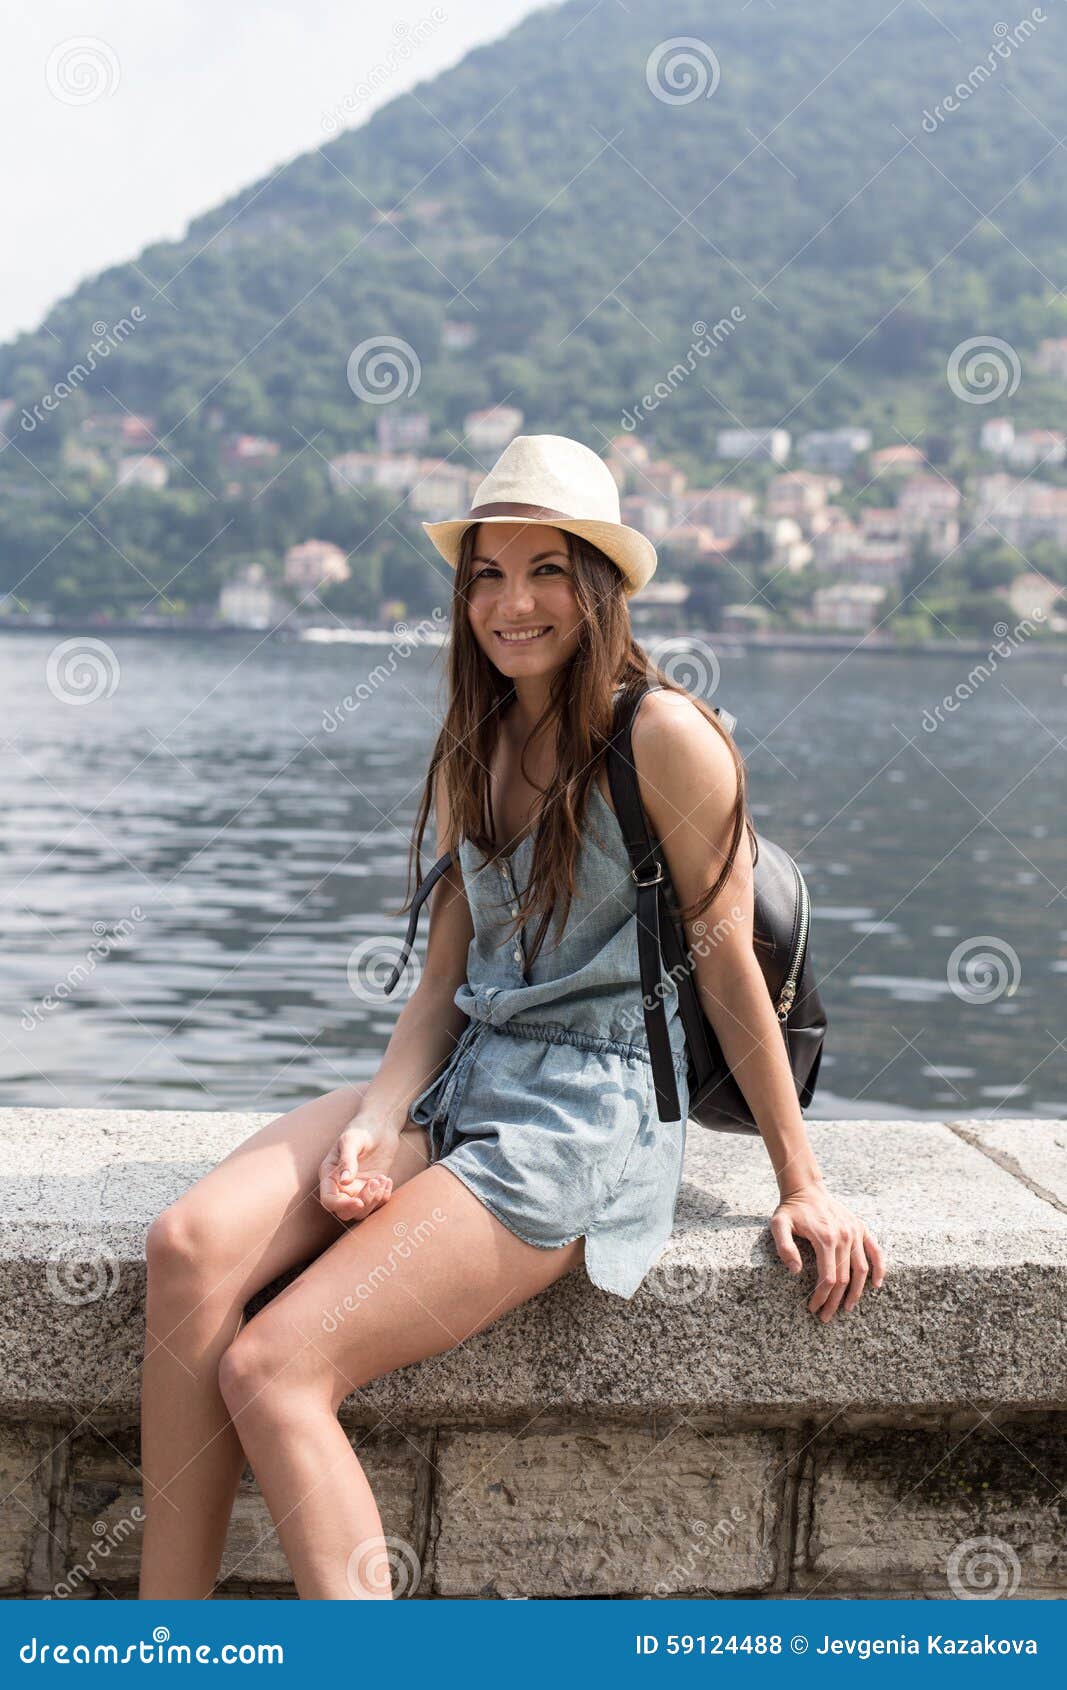 Smiling girl by the lake stock photo. Image of smiling - 59124488